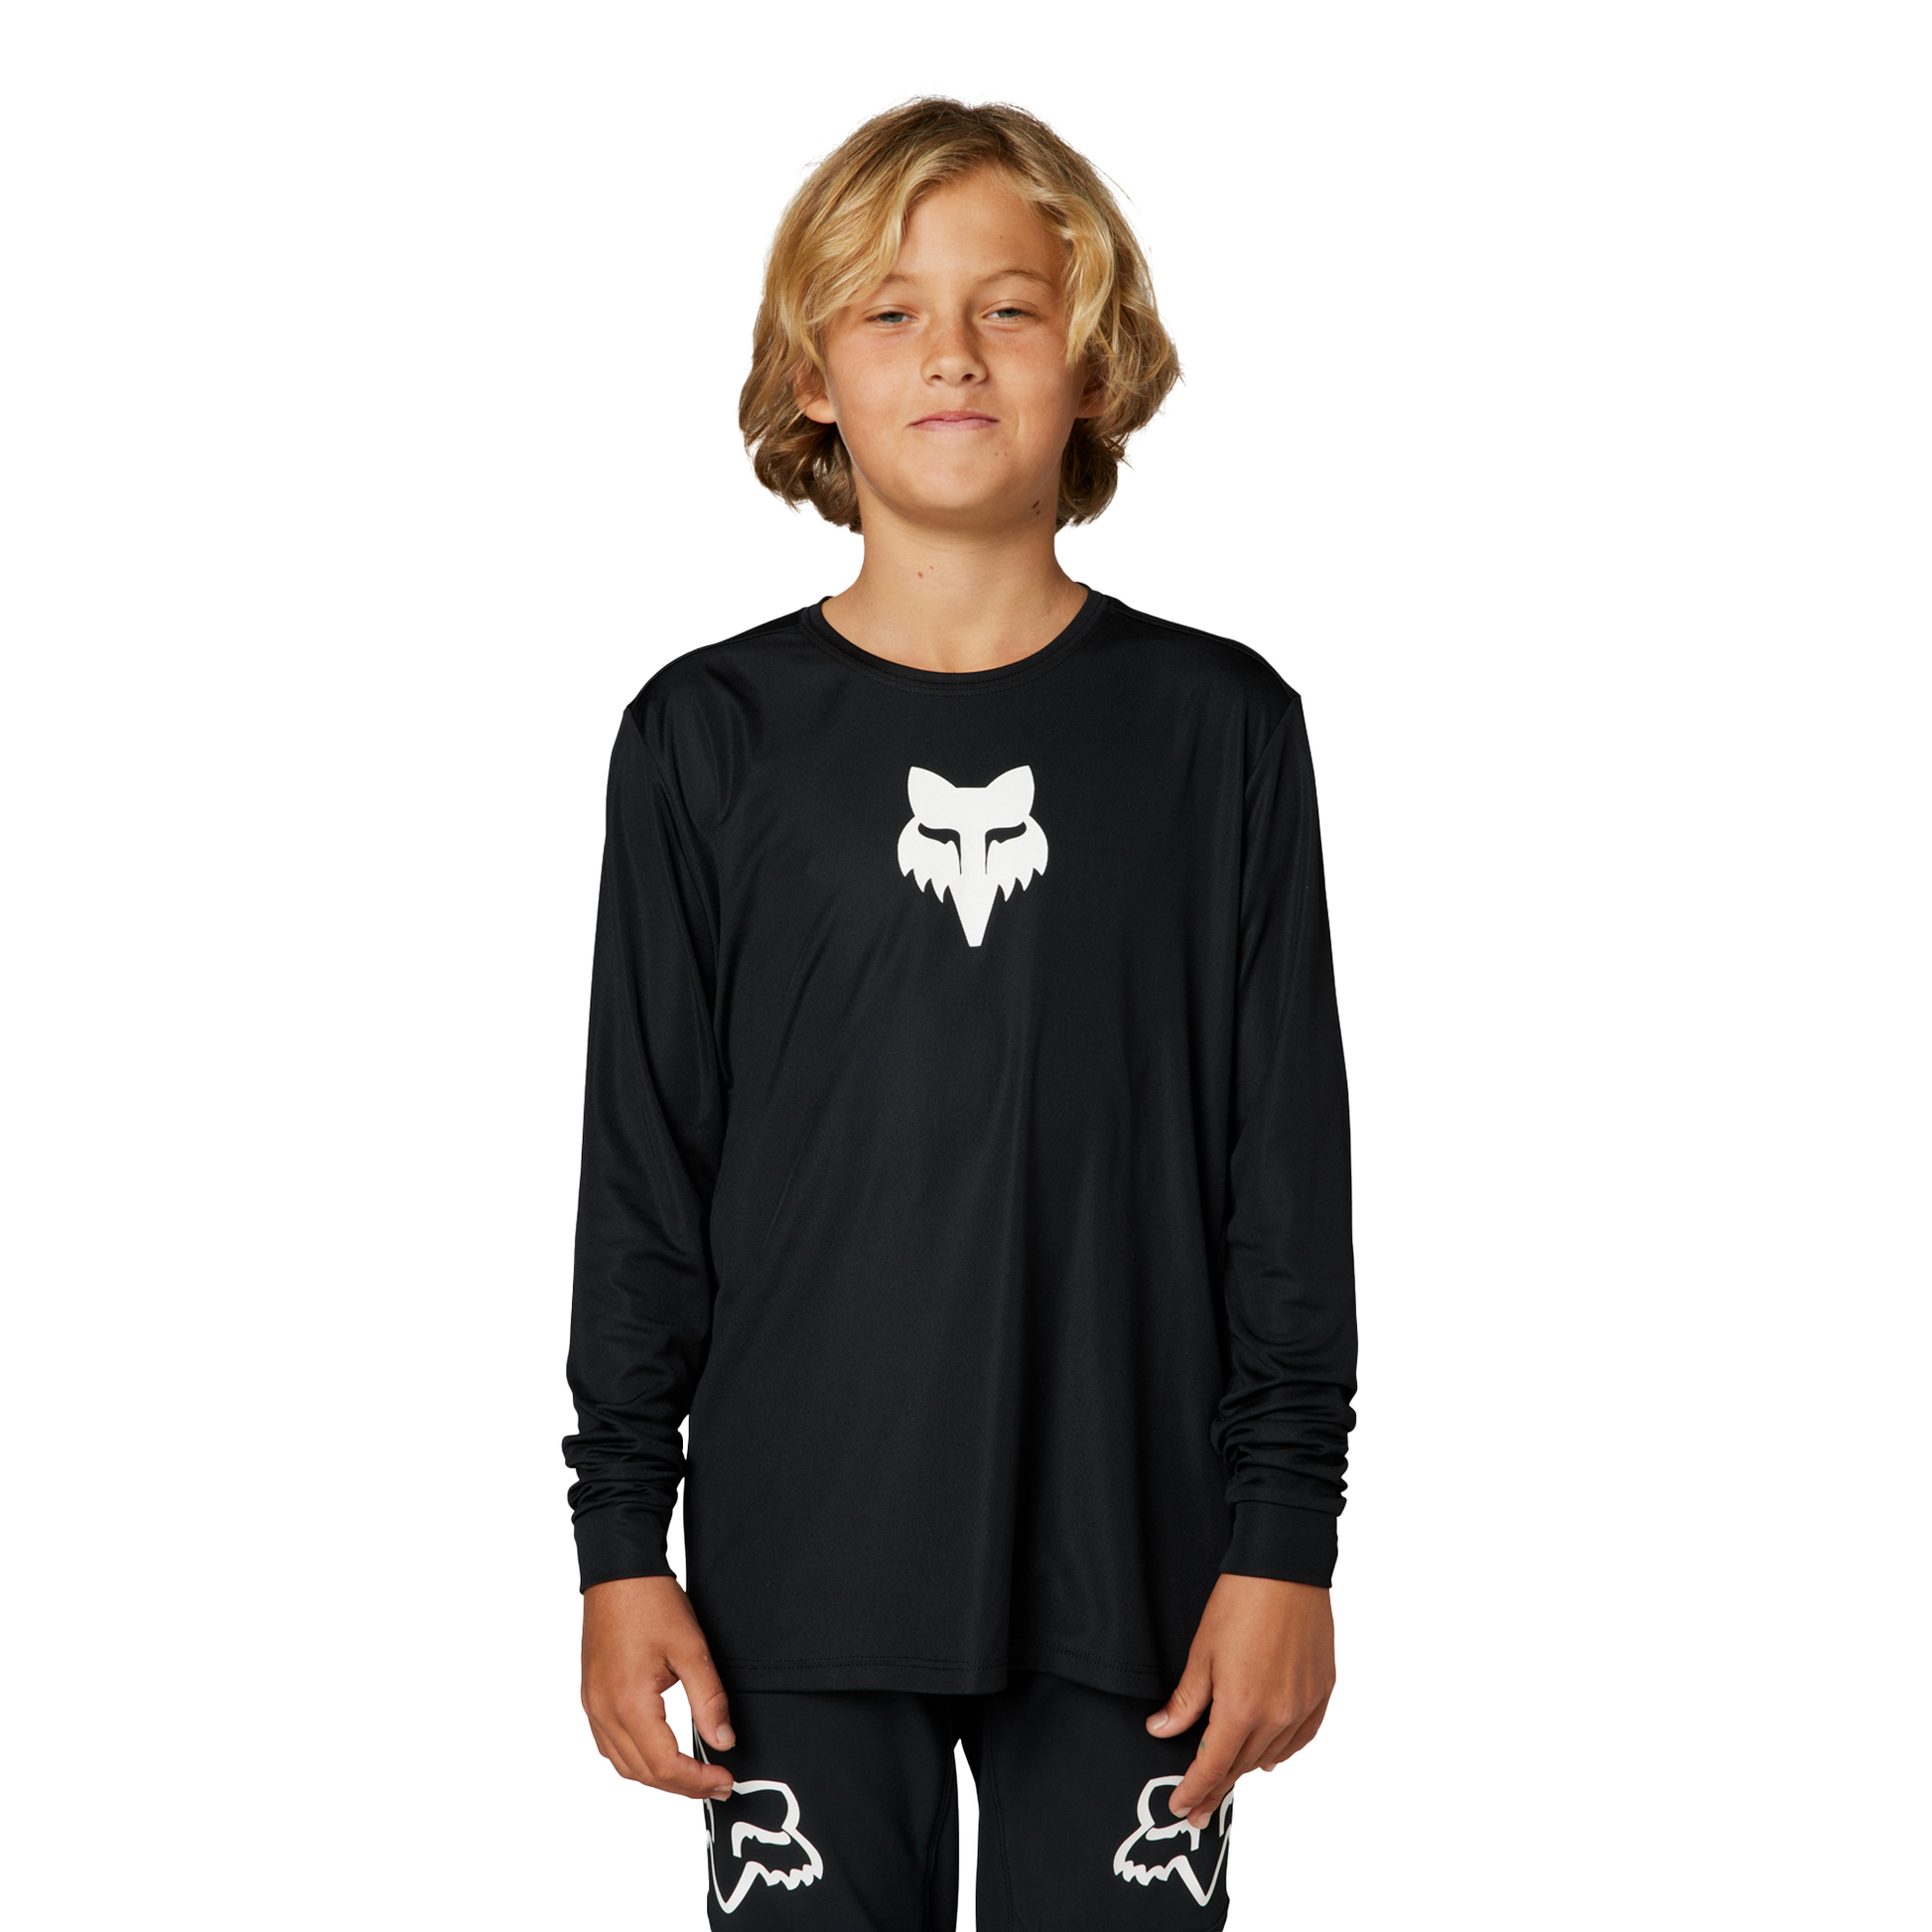 Fox Ranger Youth Long Sleeve Jersey - Youth S - Black - Image 2